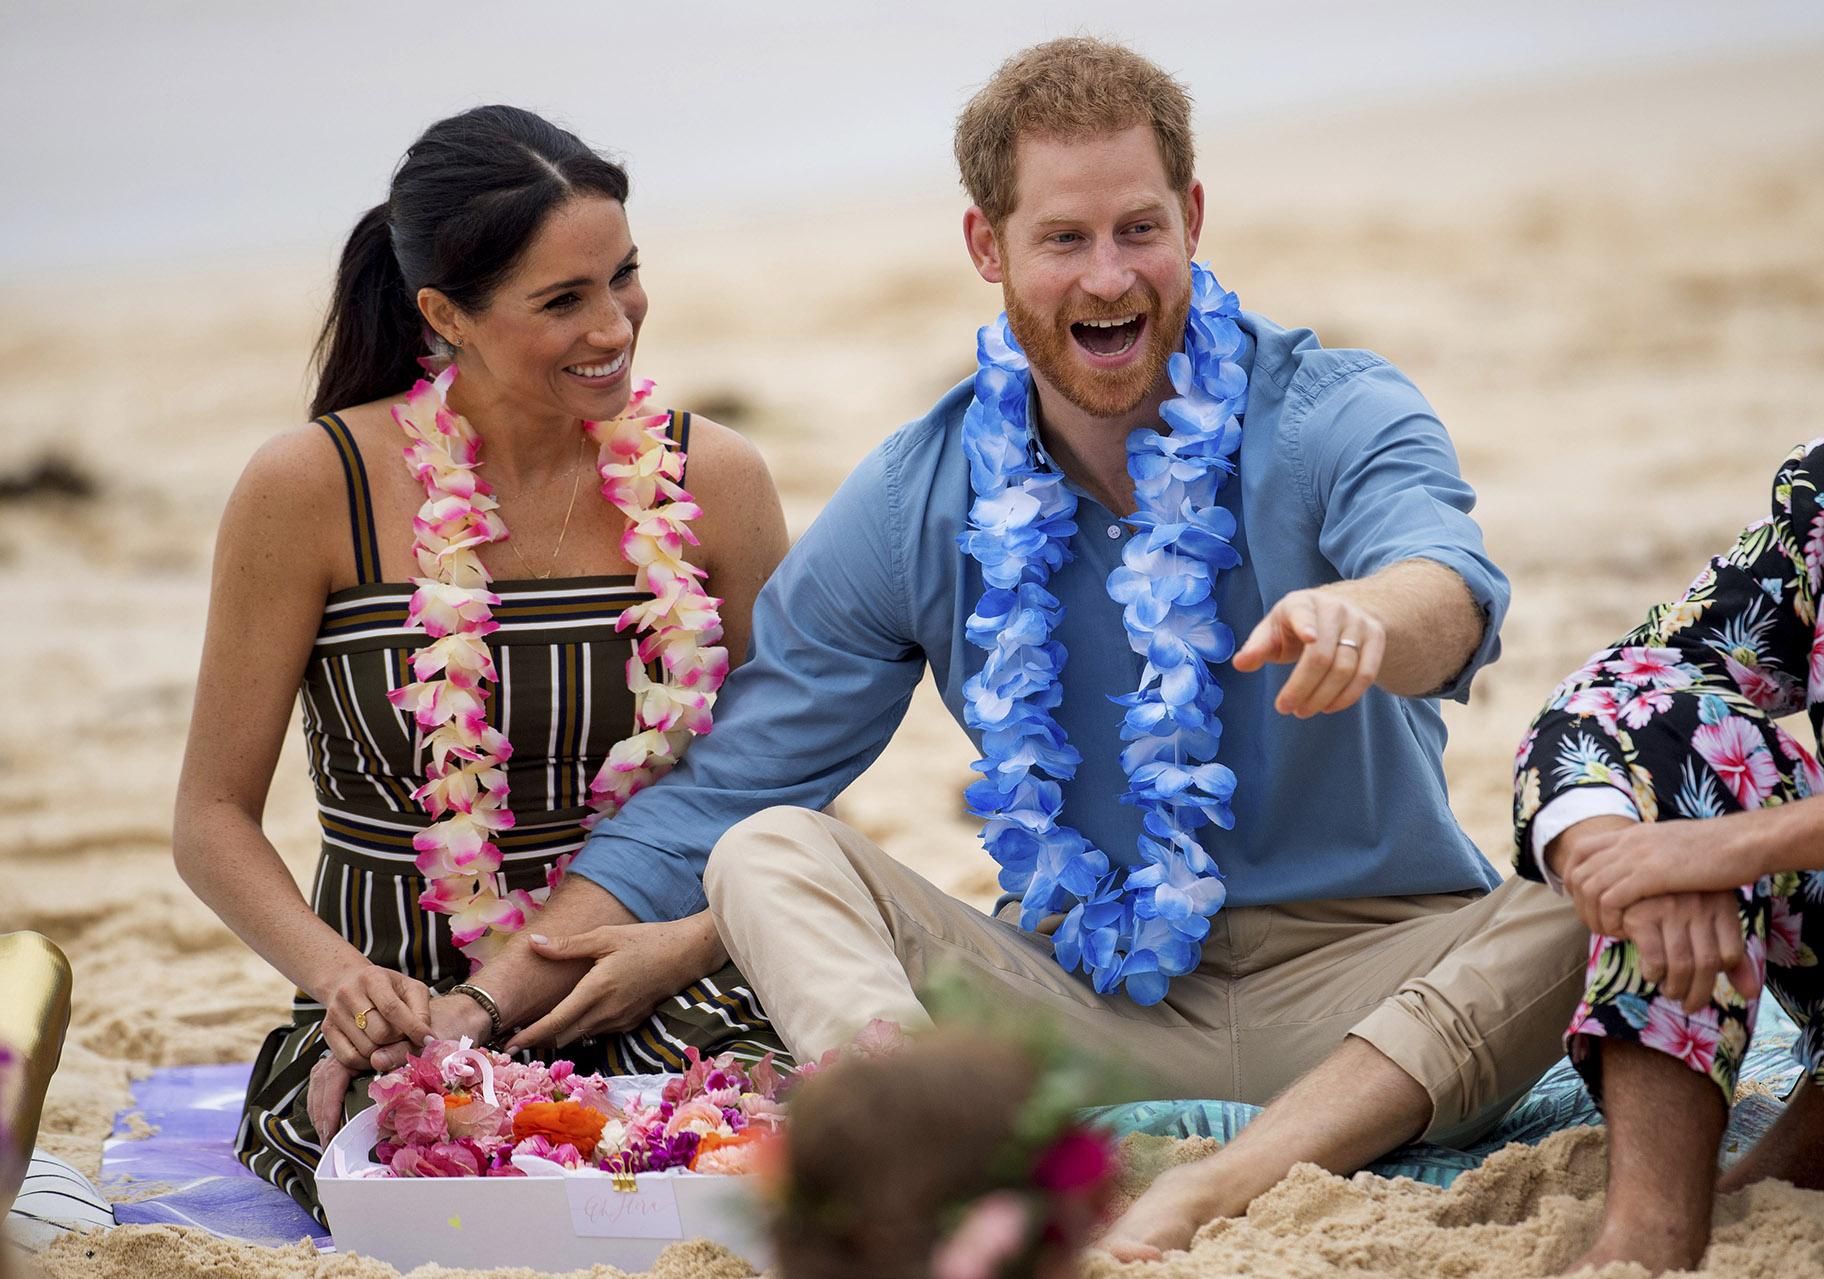 In this Friday, Oct. 19, 2018 file photo, Britain’s Prince Harry and Meghan, Duchess of Sussex, meet with a local surfing community group, known as OneWave, raising awareness for mental health and wellbeing in a fun and engaging way at Bondi Beach in Sydney, Australia. (Dominic Lipinski / Pool via AP)